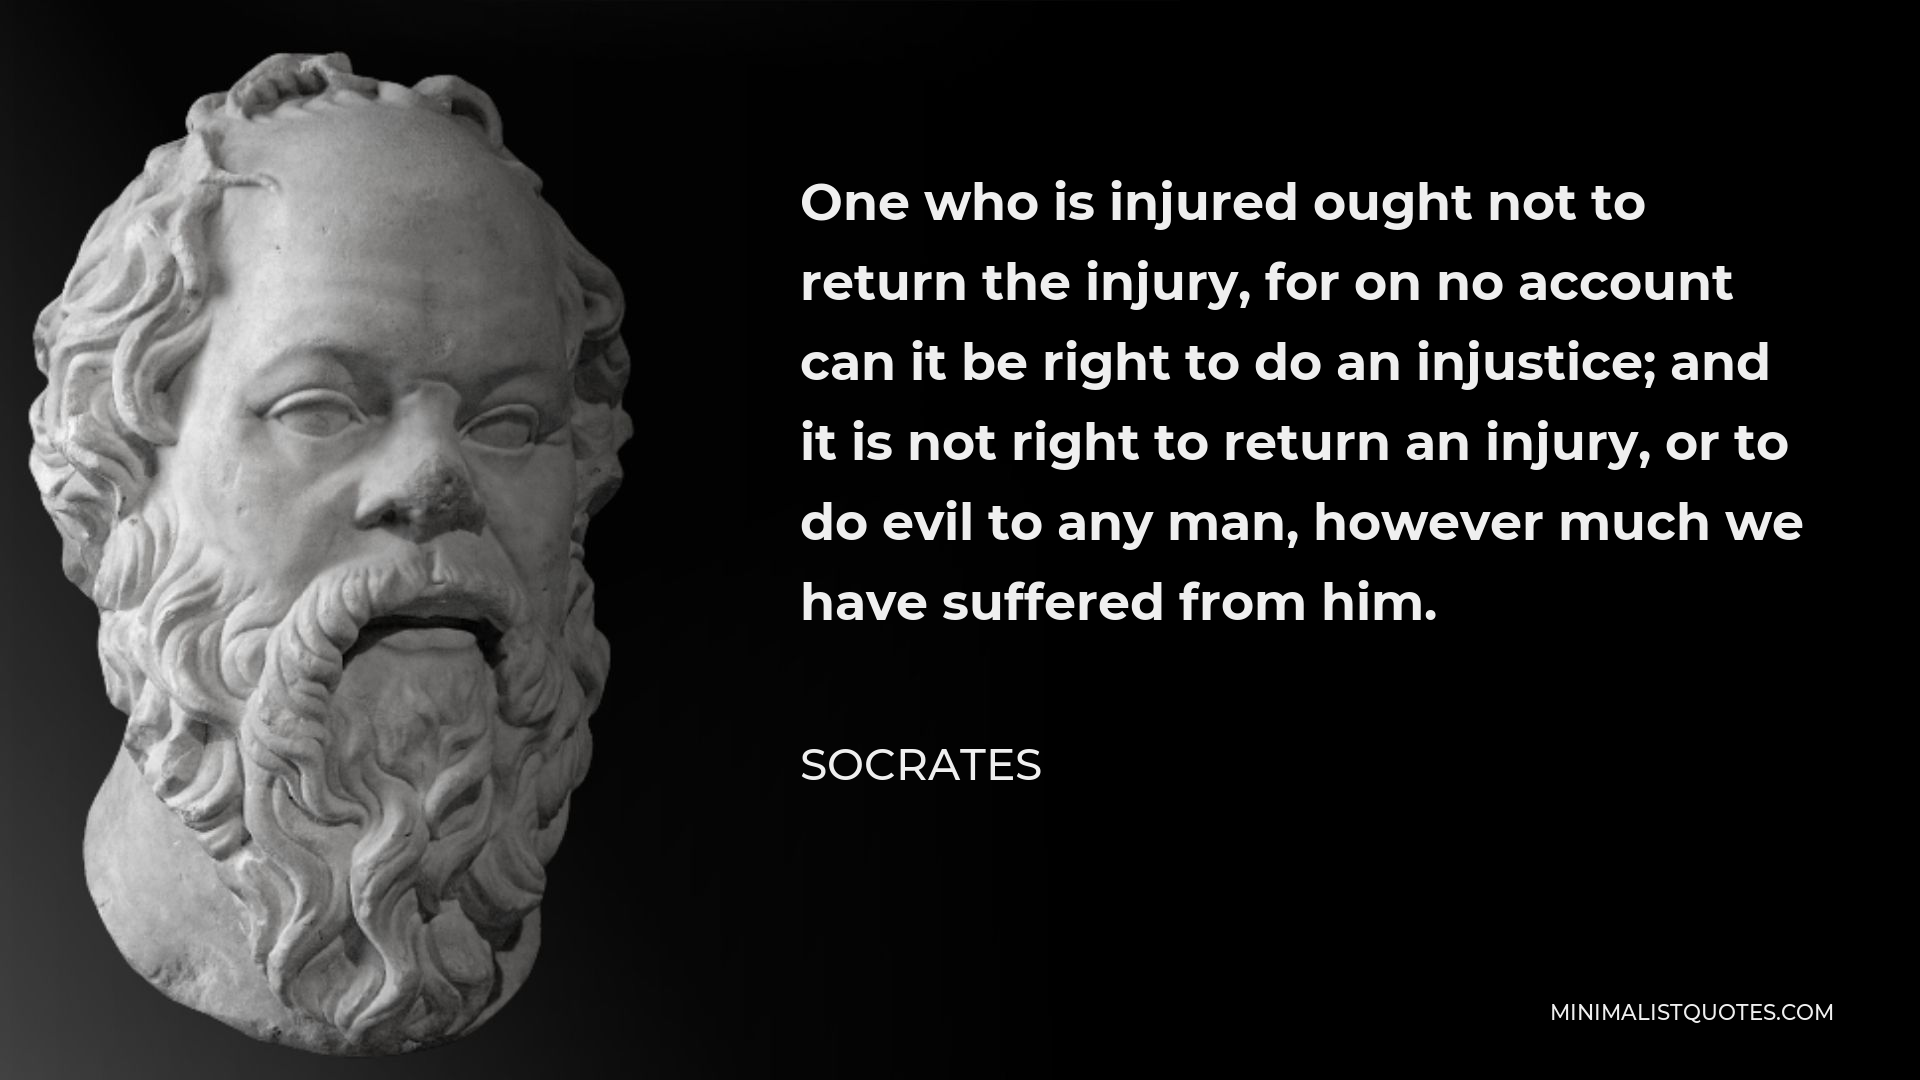 Socrates Quote - One who is injured ought not to return the injury, for on no account can it be right to do an injustice; and it is not right to return an injury, or to do evil to any man, however much we have suffered from him.